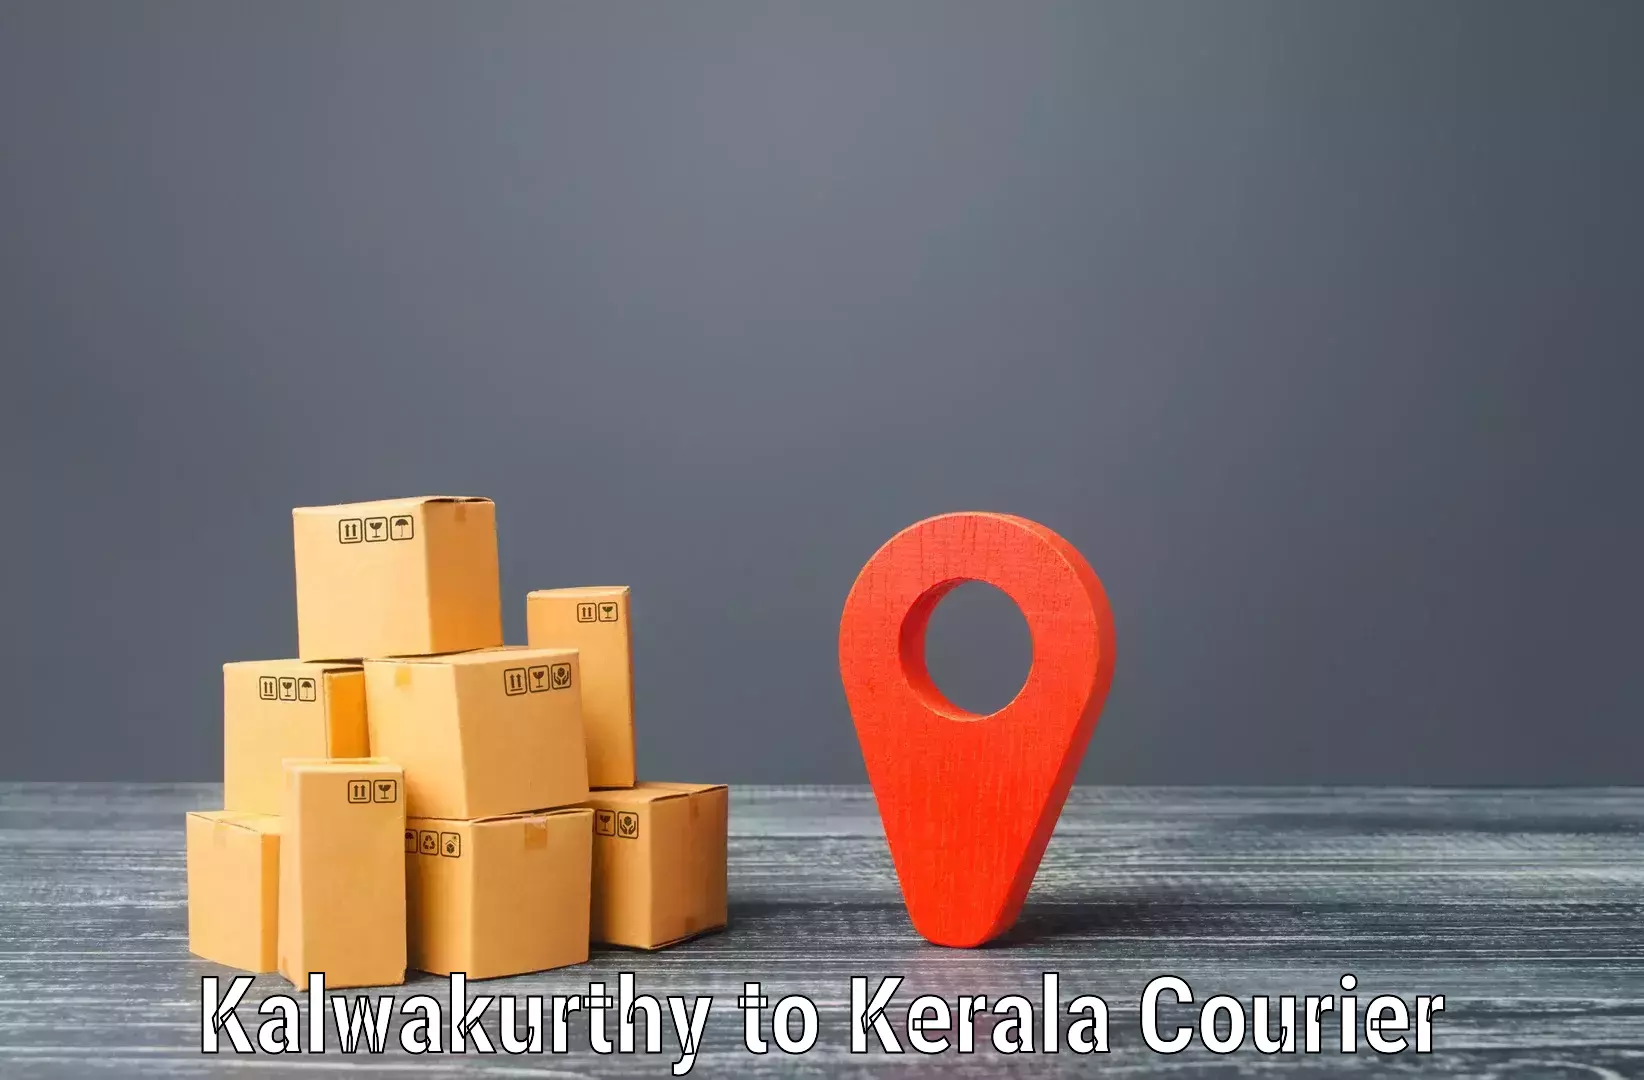 Package delivery network Kalwakurthy to Kuchi